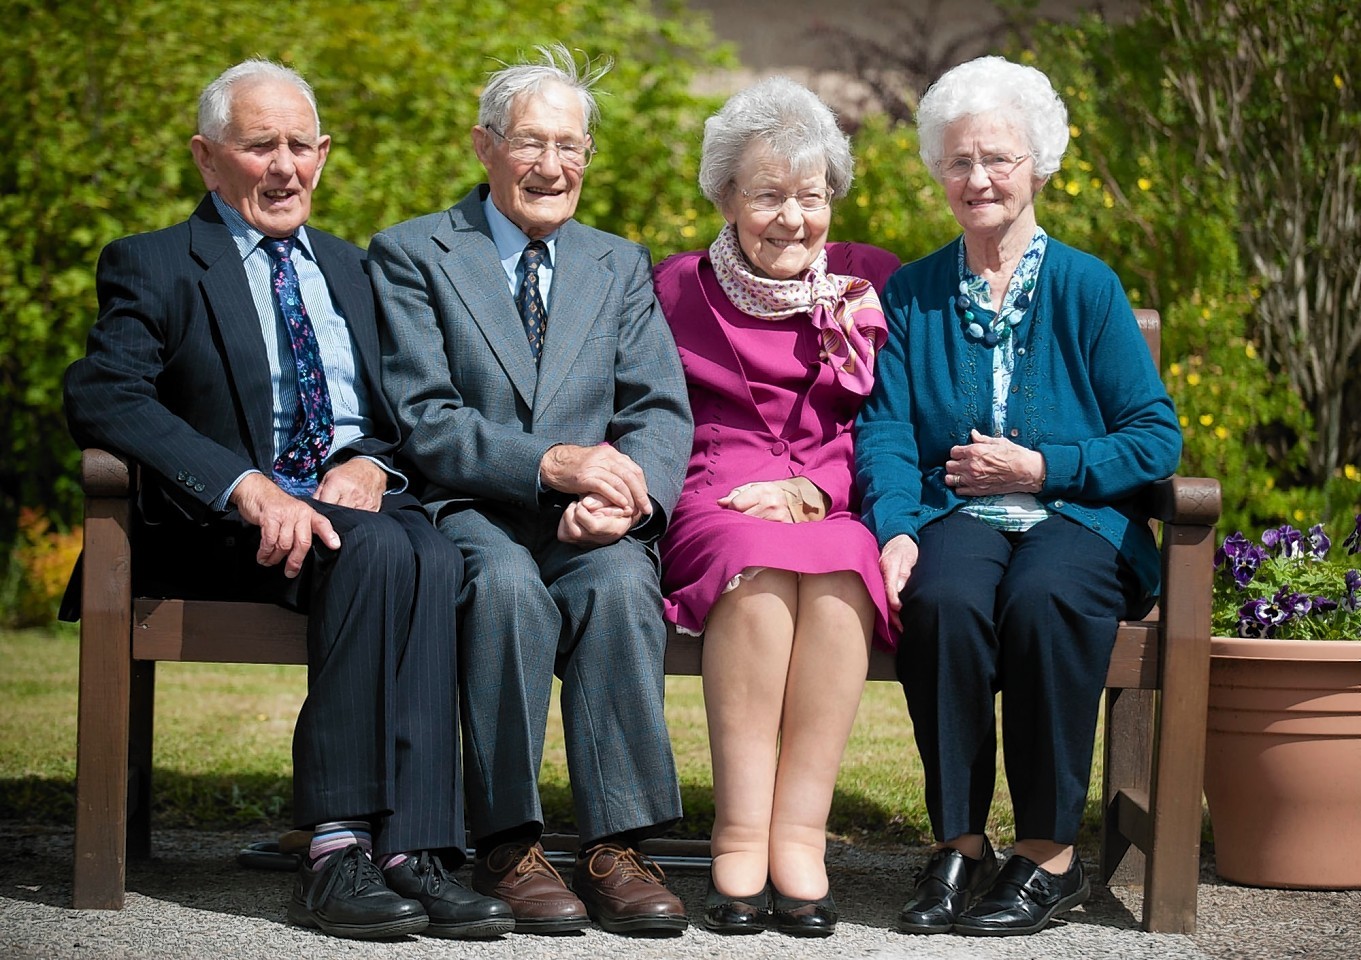 James and Mary Coutts celebrate their 70th wedding anniversary